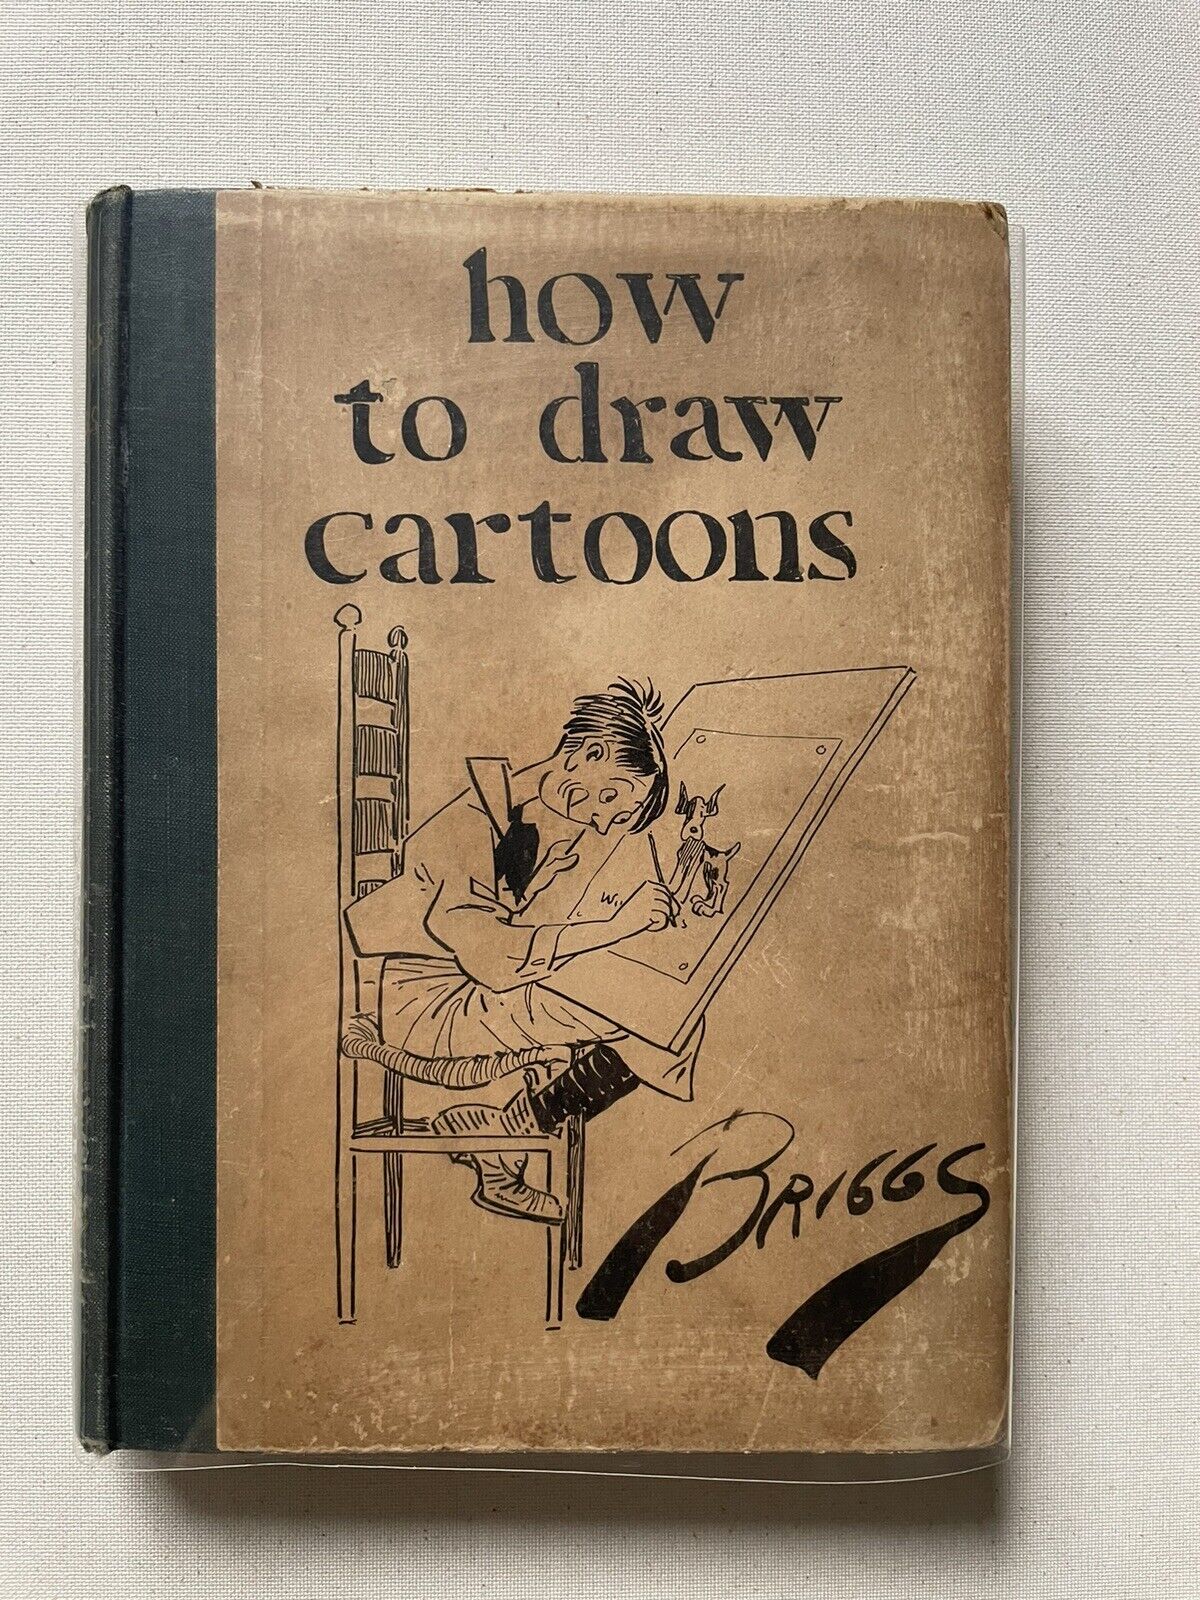 How To Draw Cartoons 1926-by Claire Briggs-Fifth Printing.